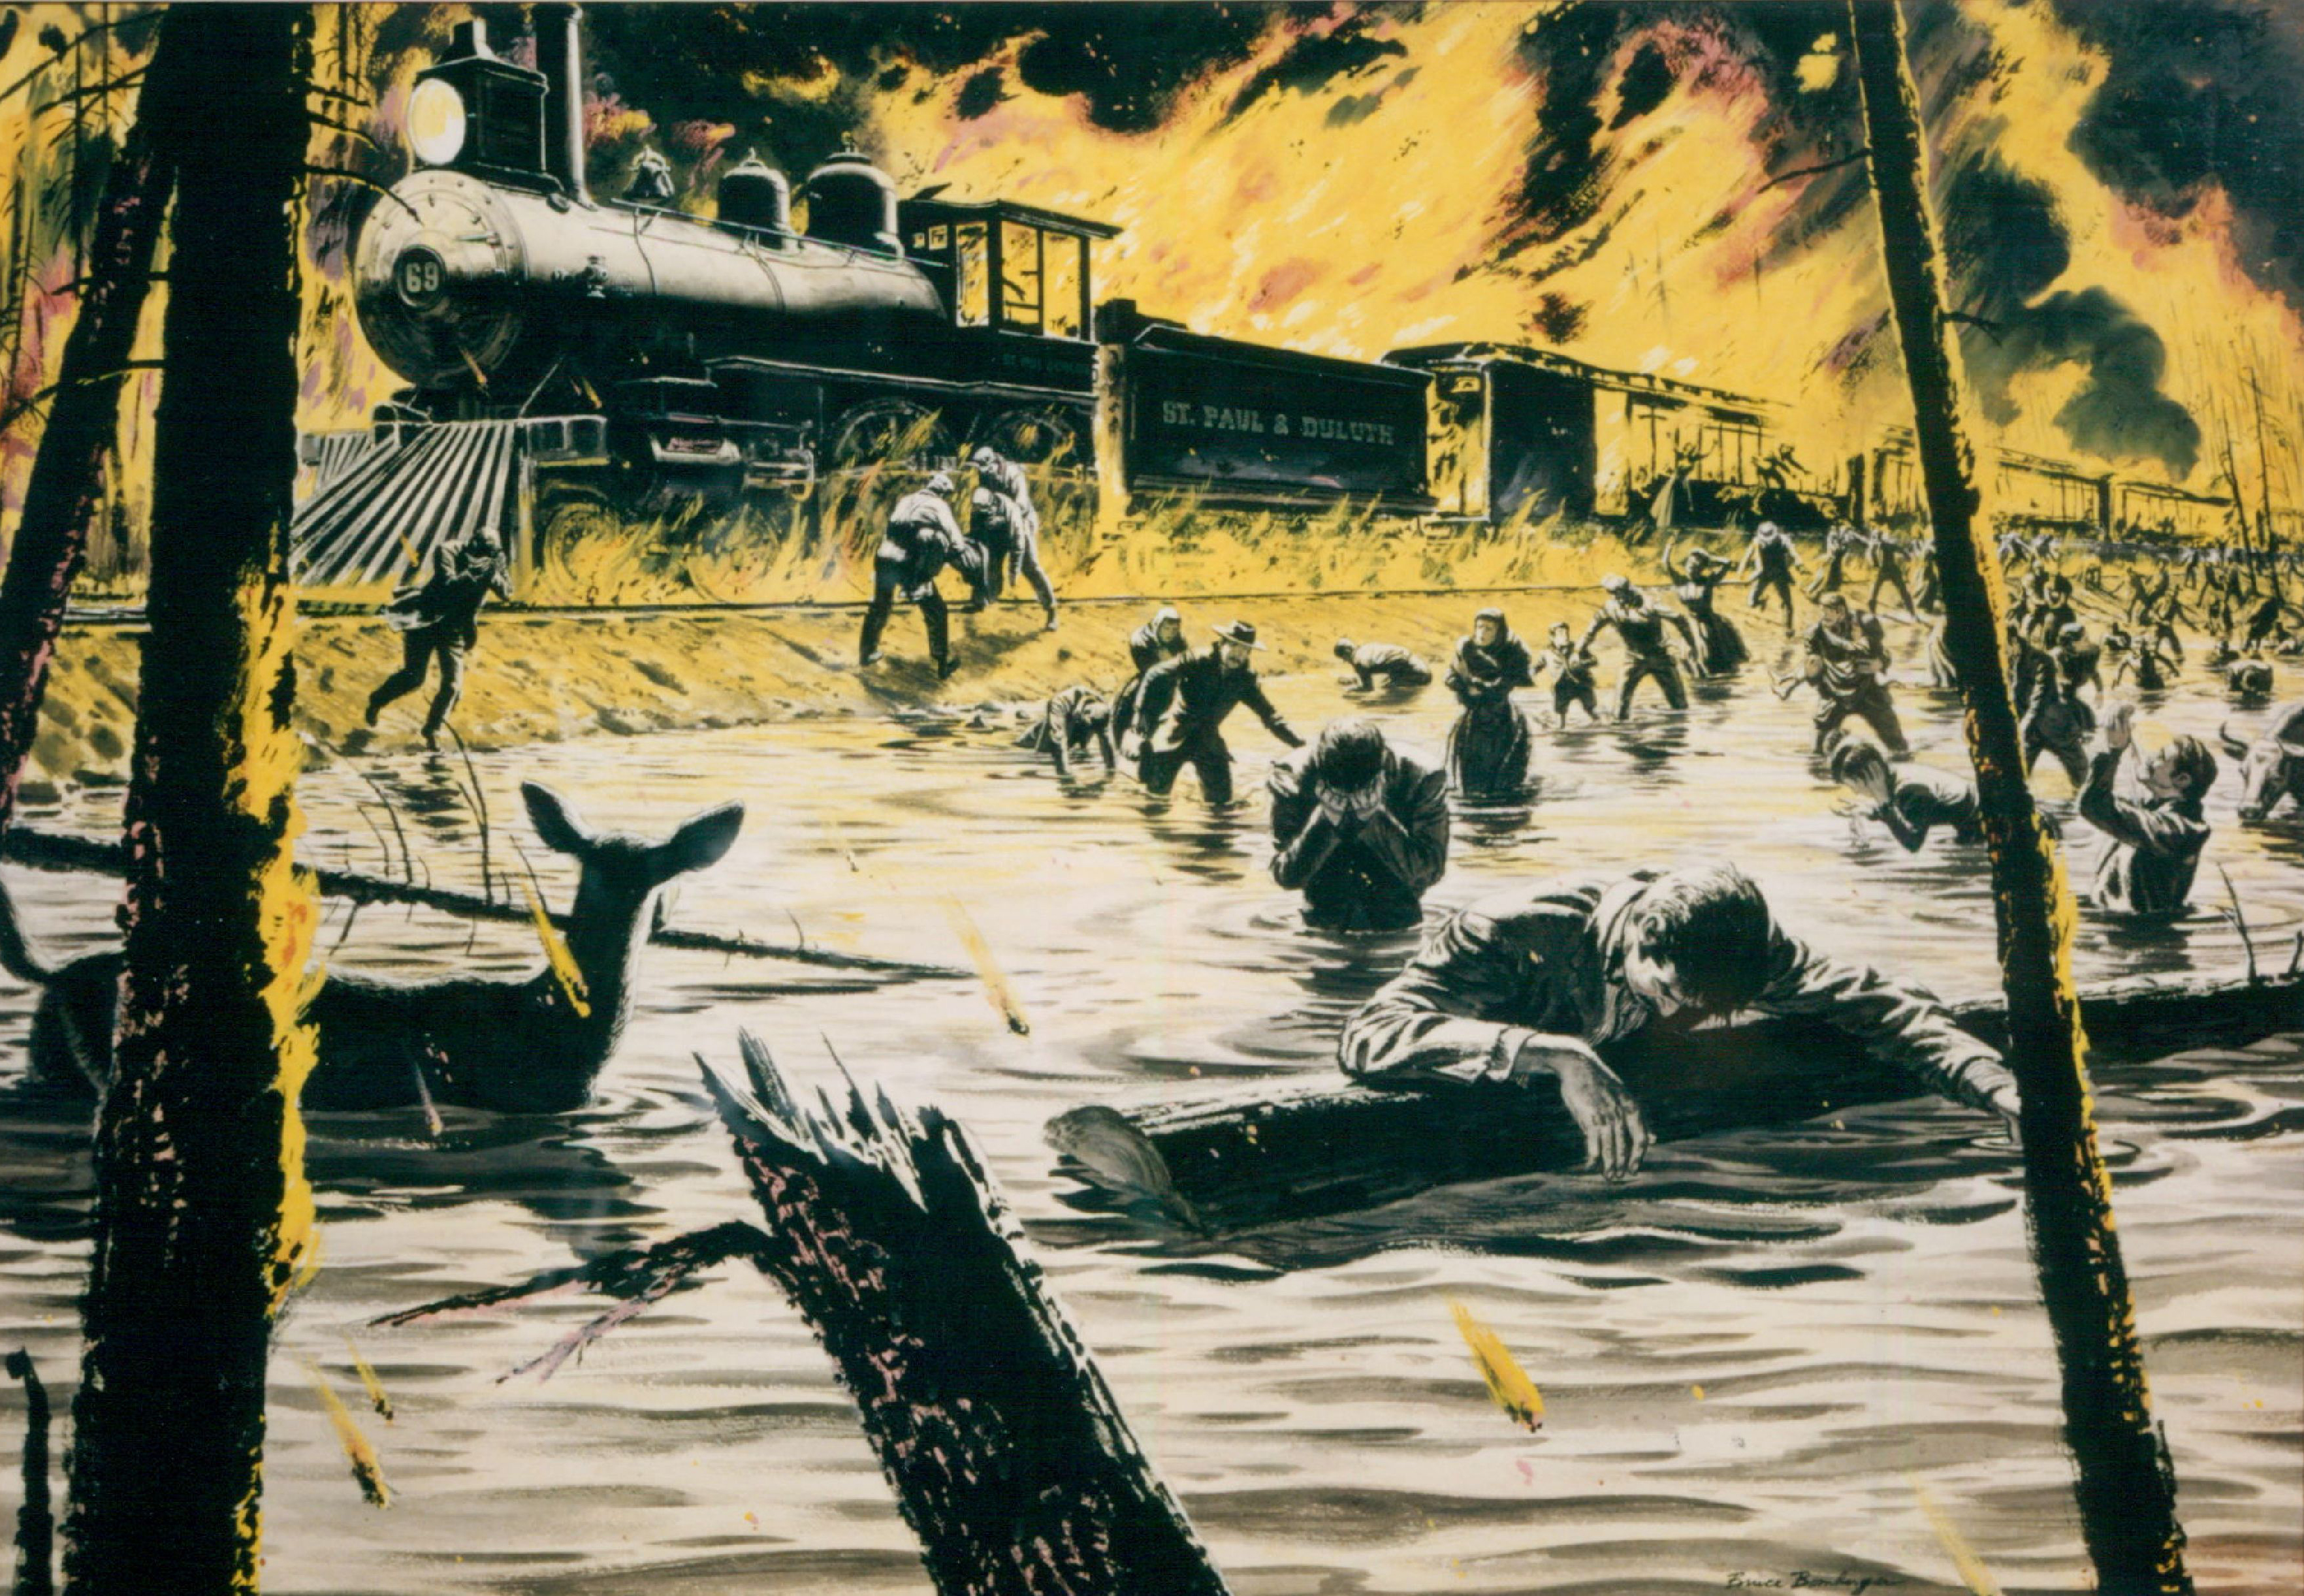 This illustration of the 1918 fires, painted in 1950 for 'True Magazine,' depicts people escaping from a burning train.